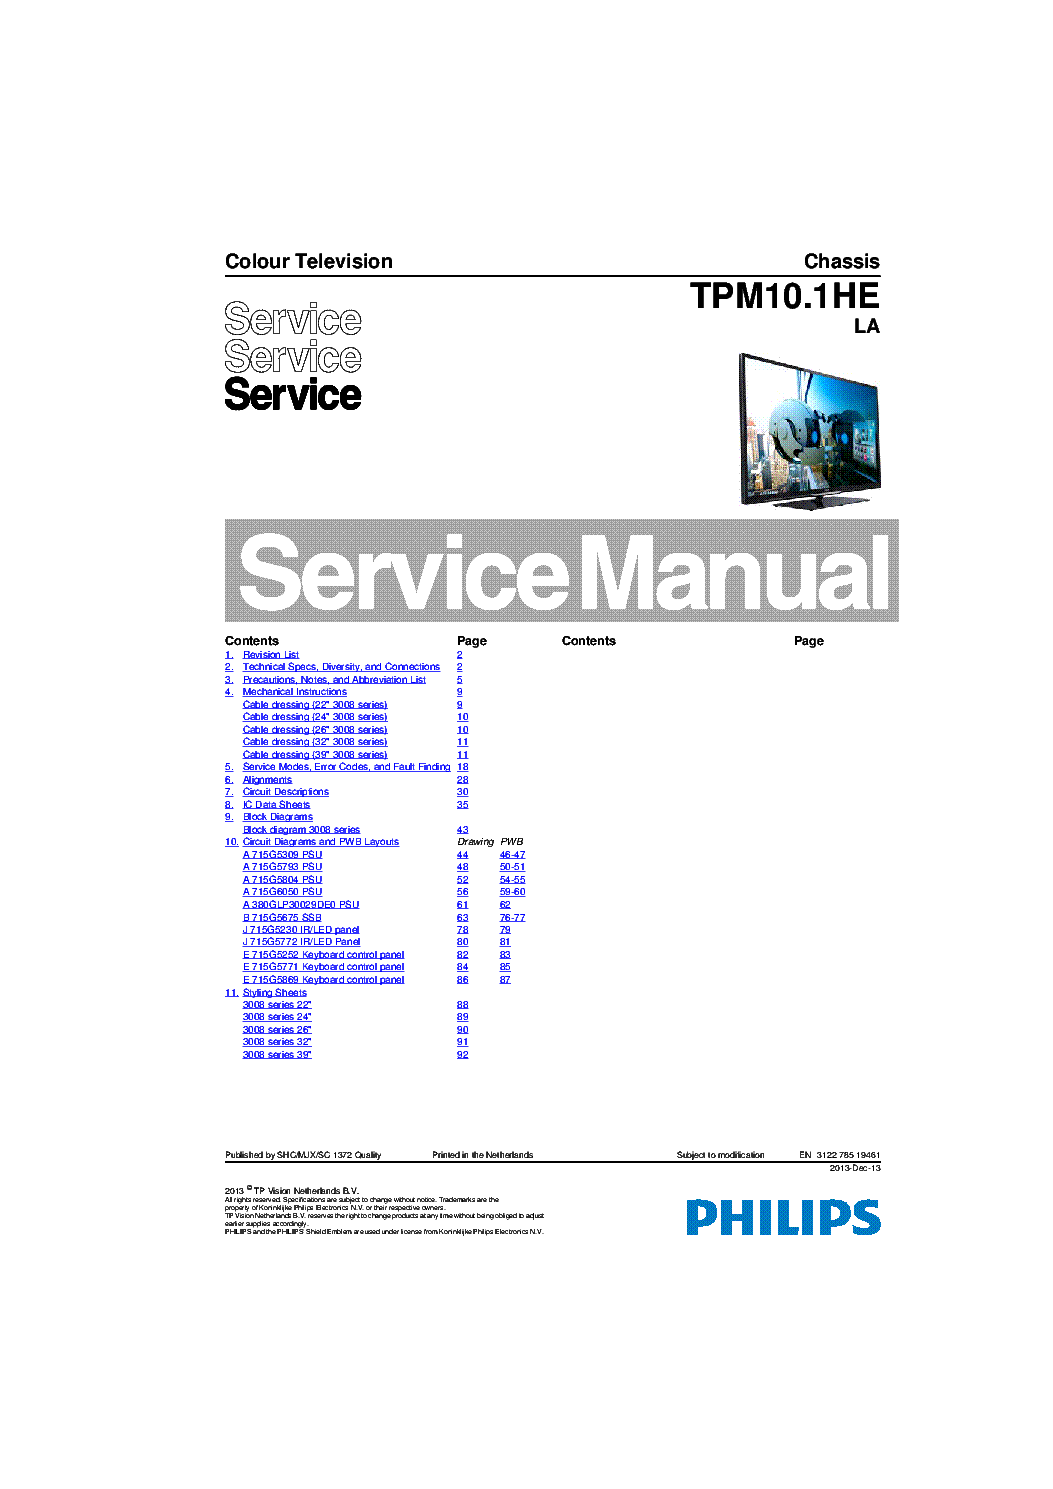 PHILIPS CHASSIS TPM10.1HE LA SM service manual (1st page)